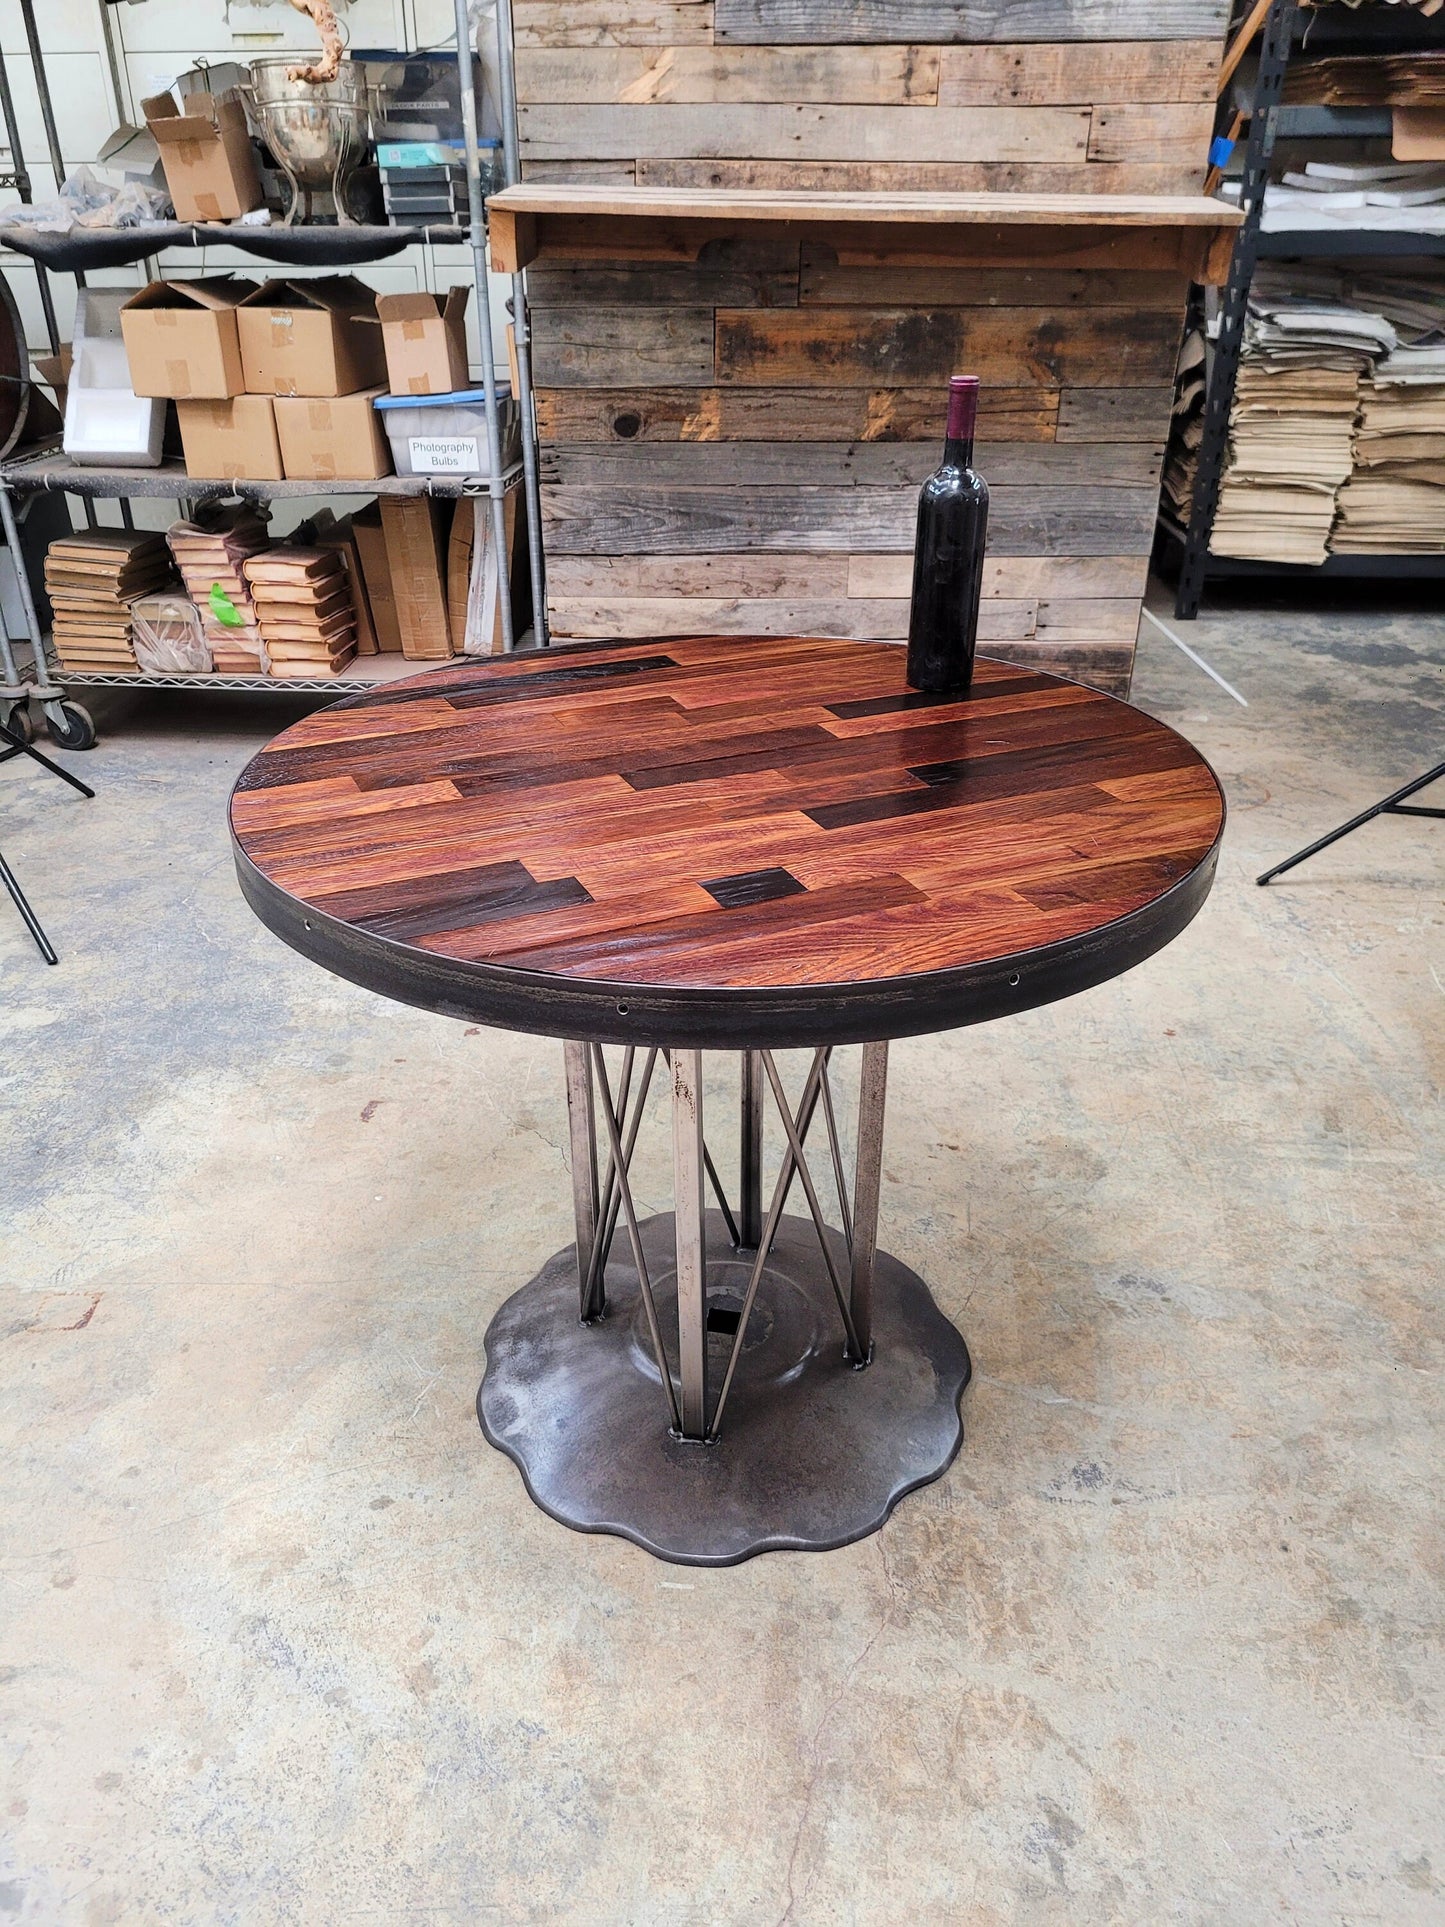 Round Wine Barrel Table - Saba - Made from retired Napa wine barrel staves 100% Recycled!